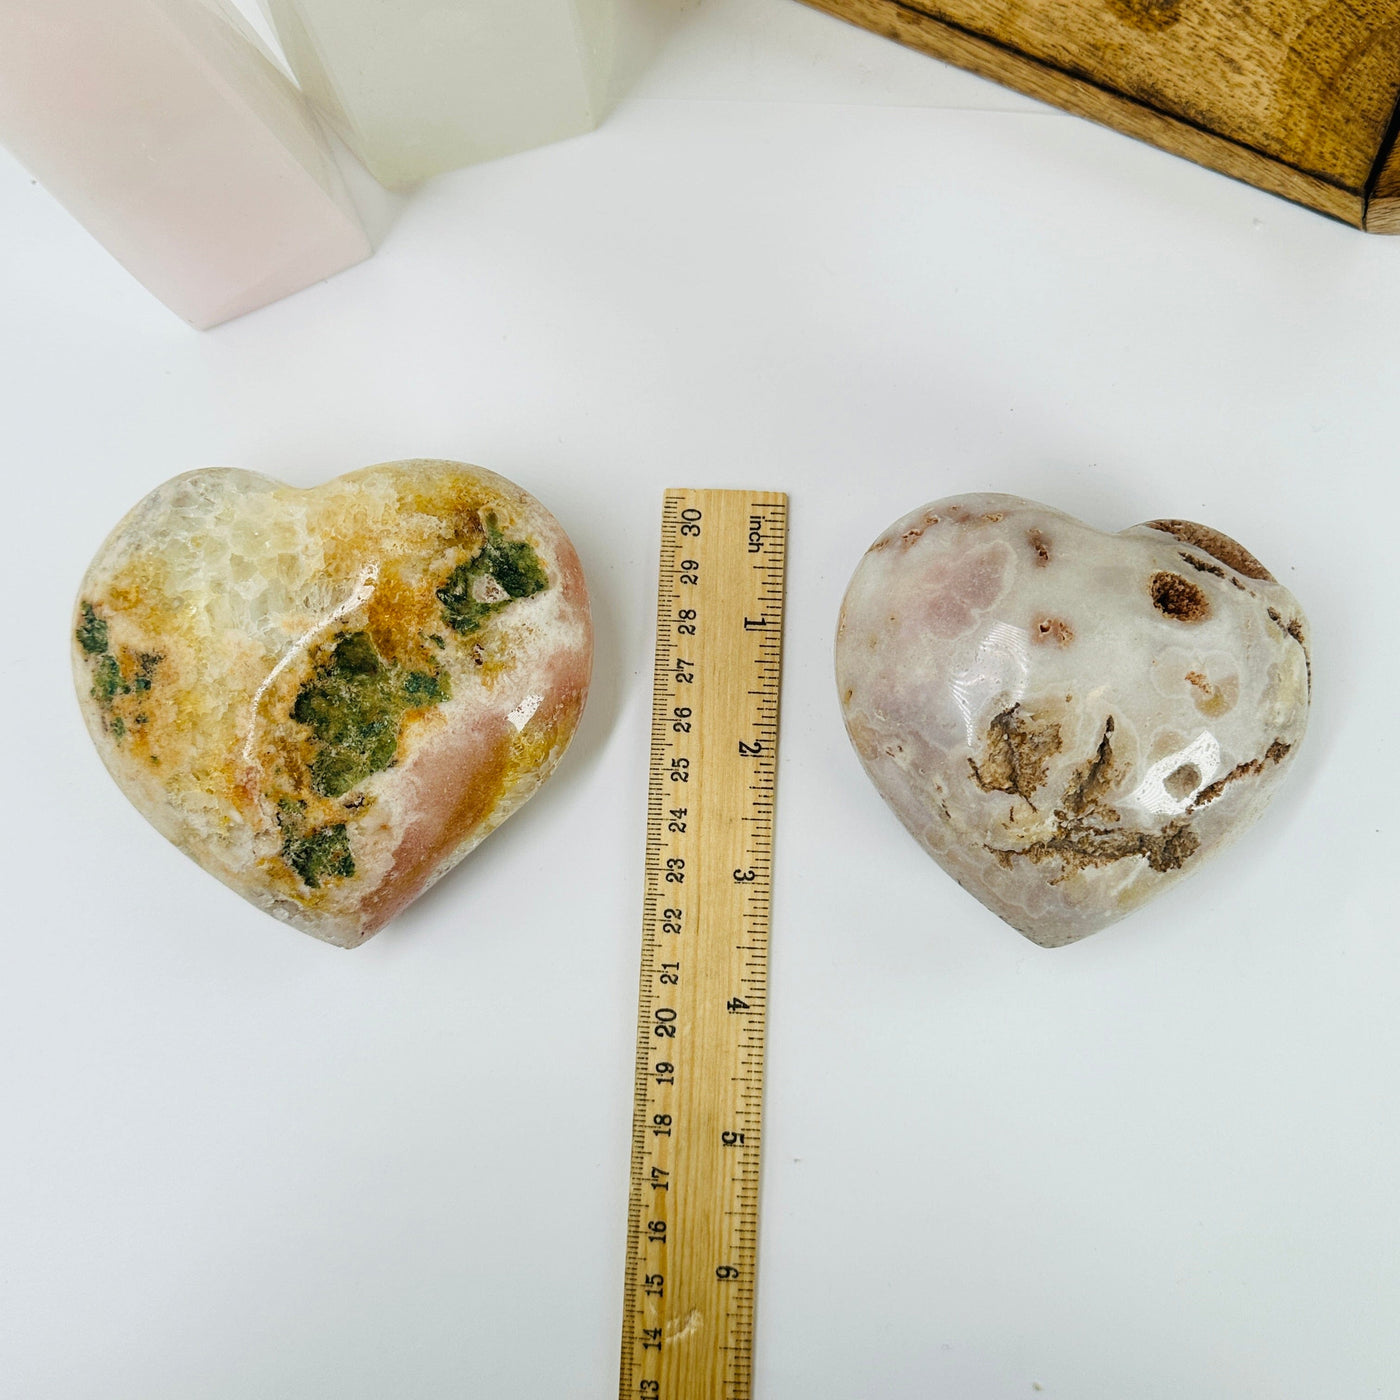 pink amethyst heart next to a ruler for size reference